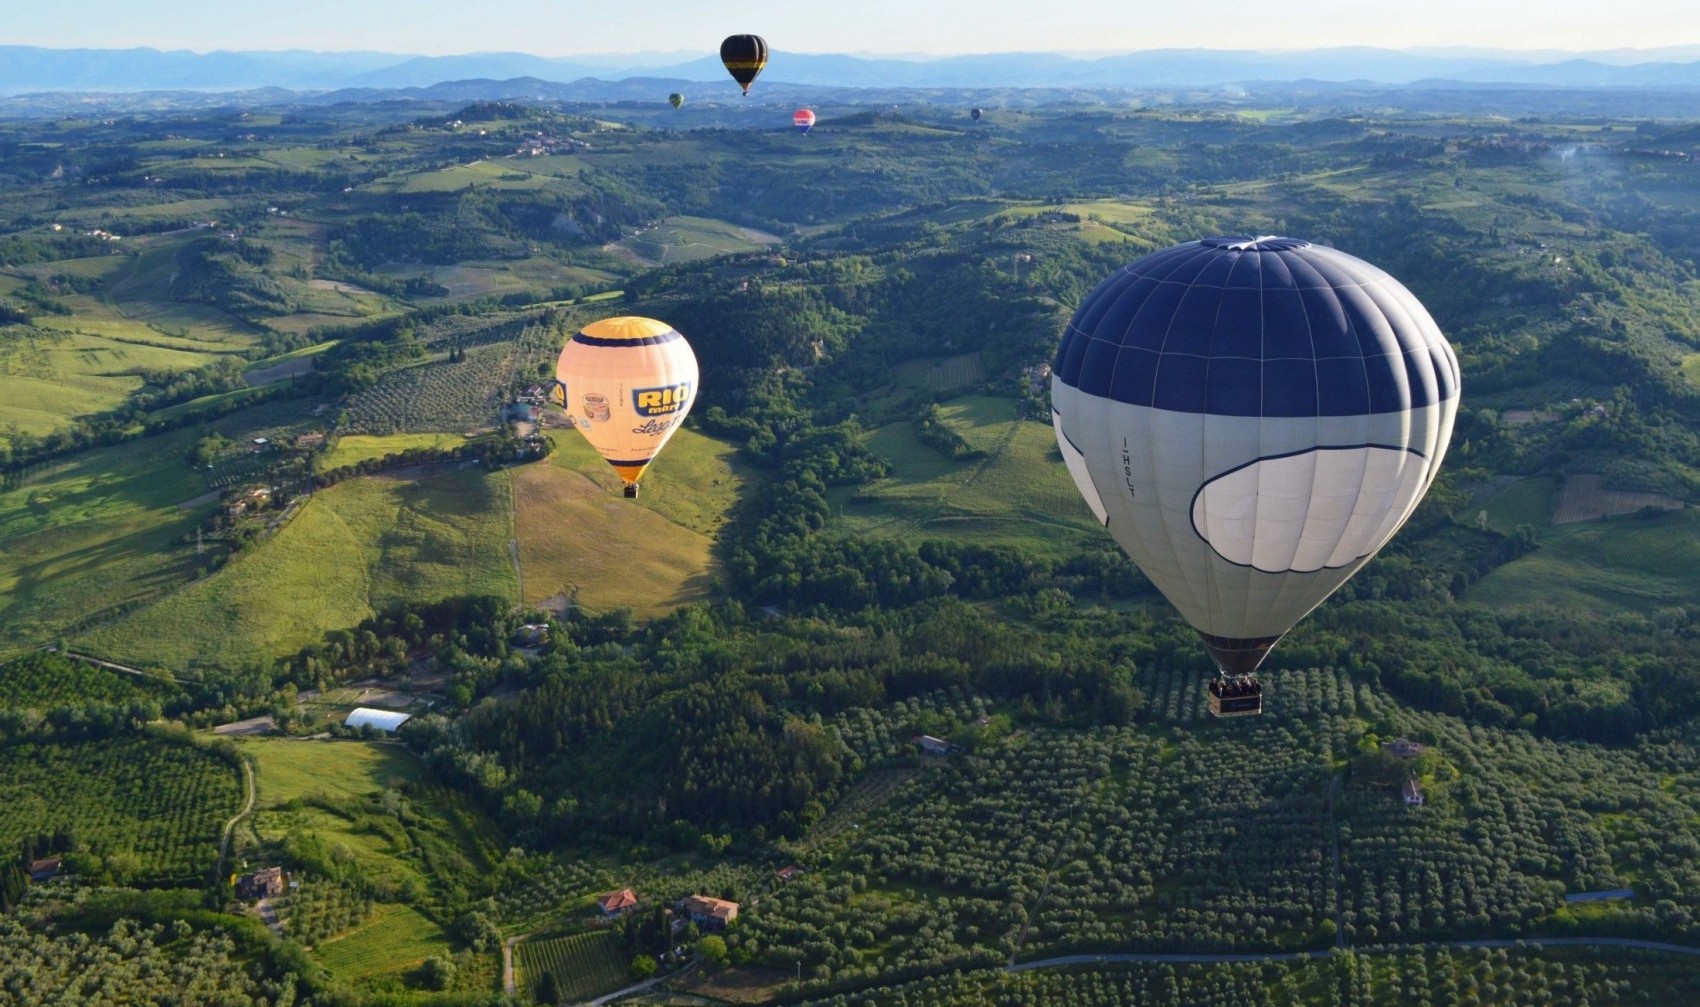 Volare in mongolfiera in toscana